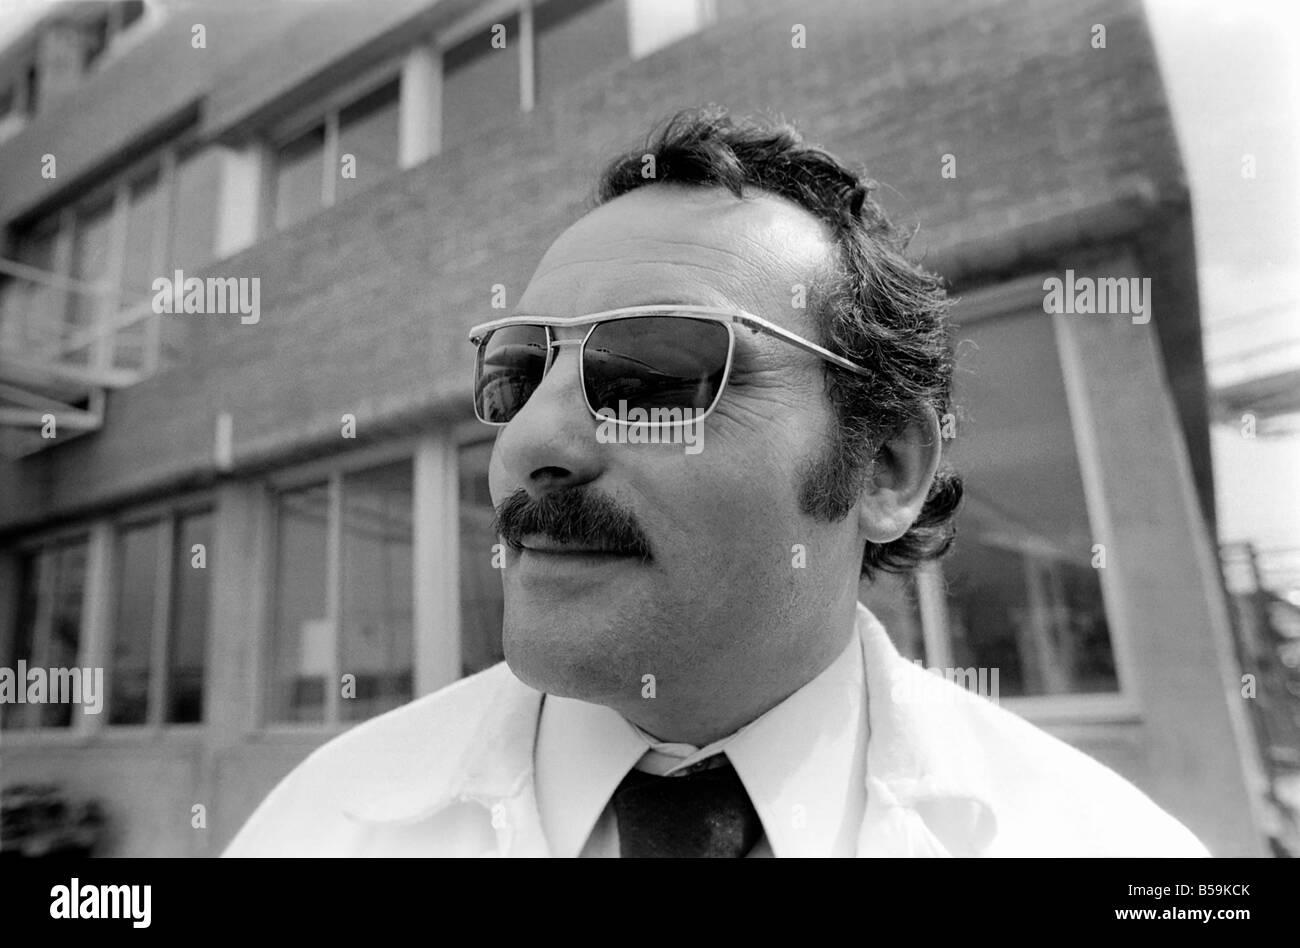 Mr. Irene Quaranta aged 39 with reflection of Concorde aircraft in his spectacles. &#13;&#10;April 1975 &#13;&#10;75-2072-019 Stock Photo